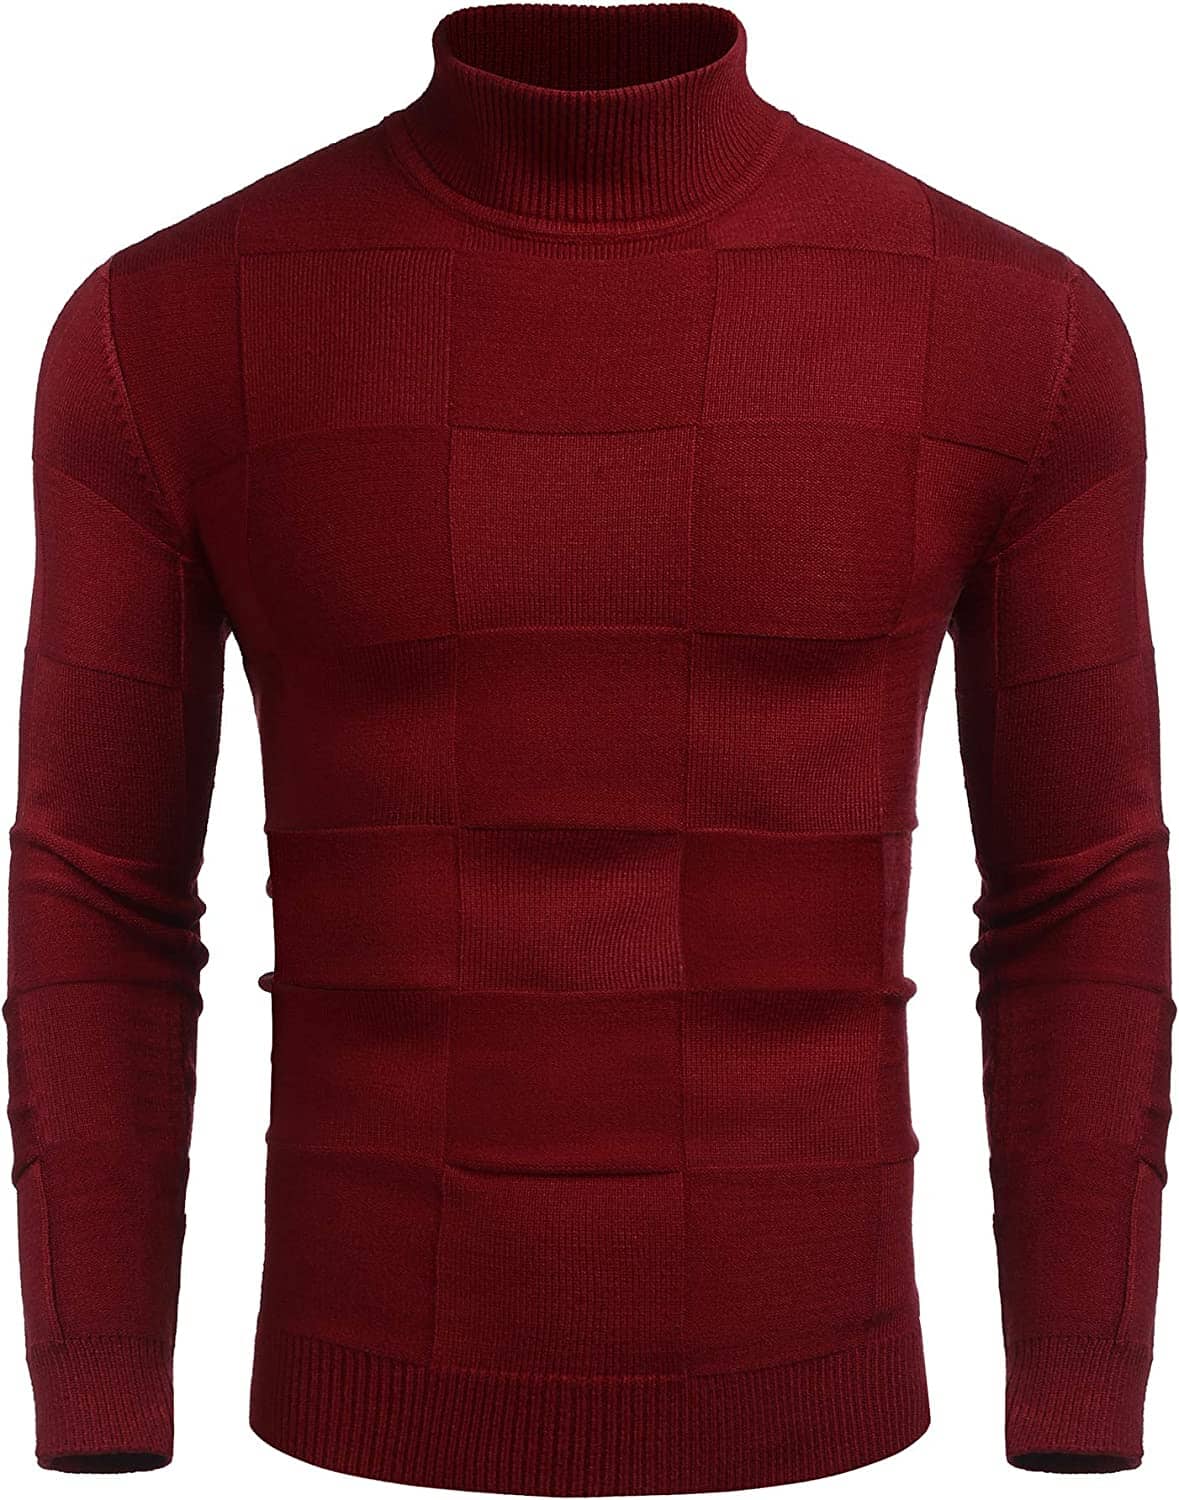 Ribbed Knit Pullover Sweater Turtneck Sweaters (US Only) Sweaters COOFANDY Store Red S 